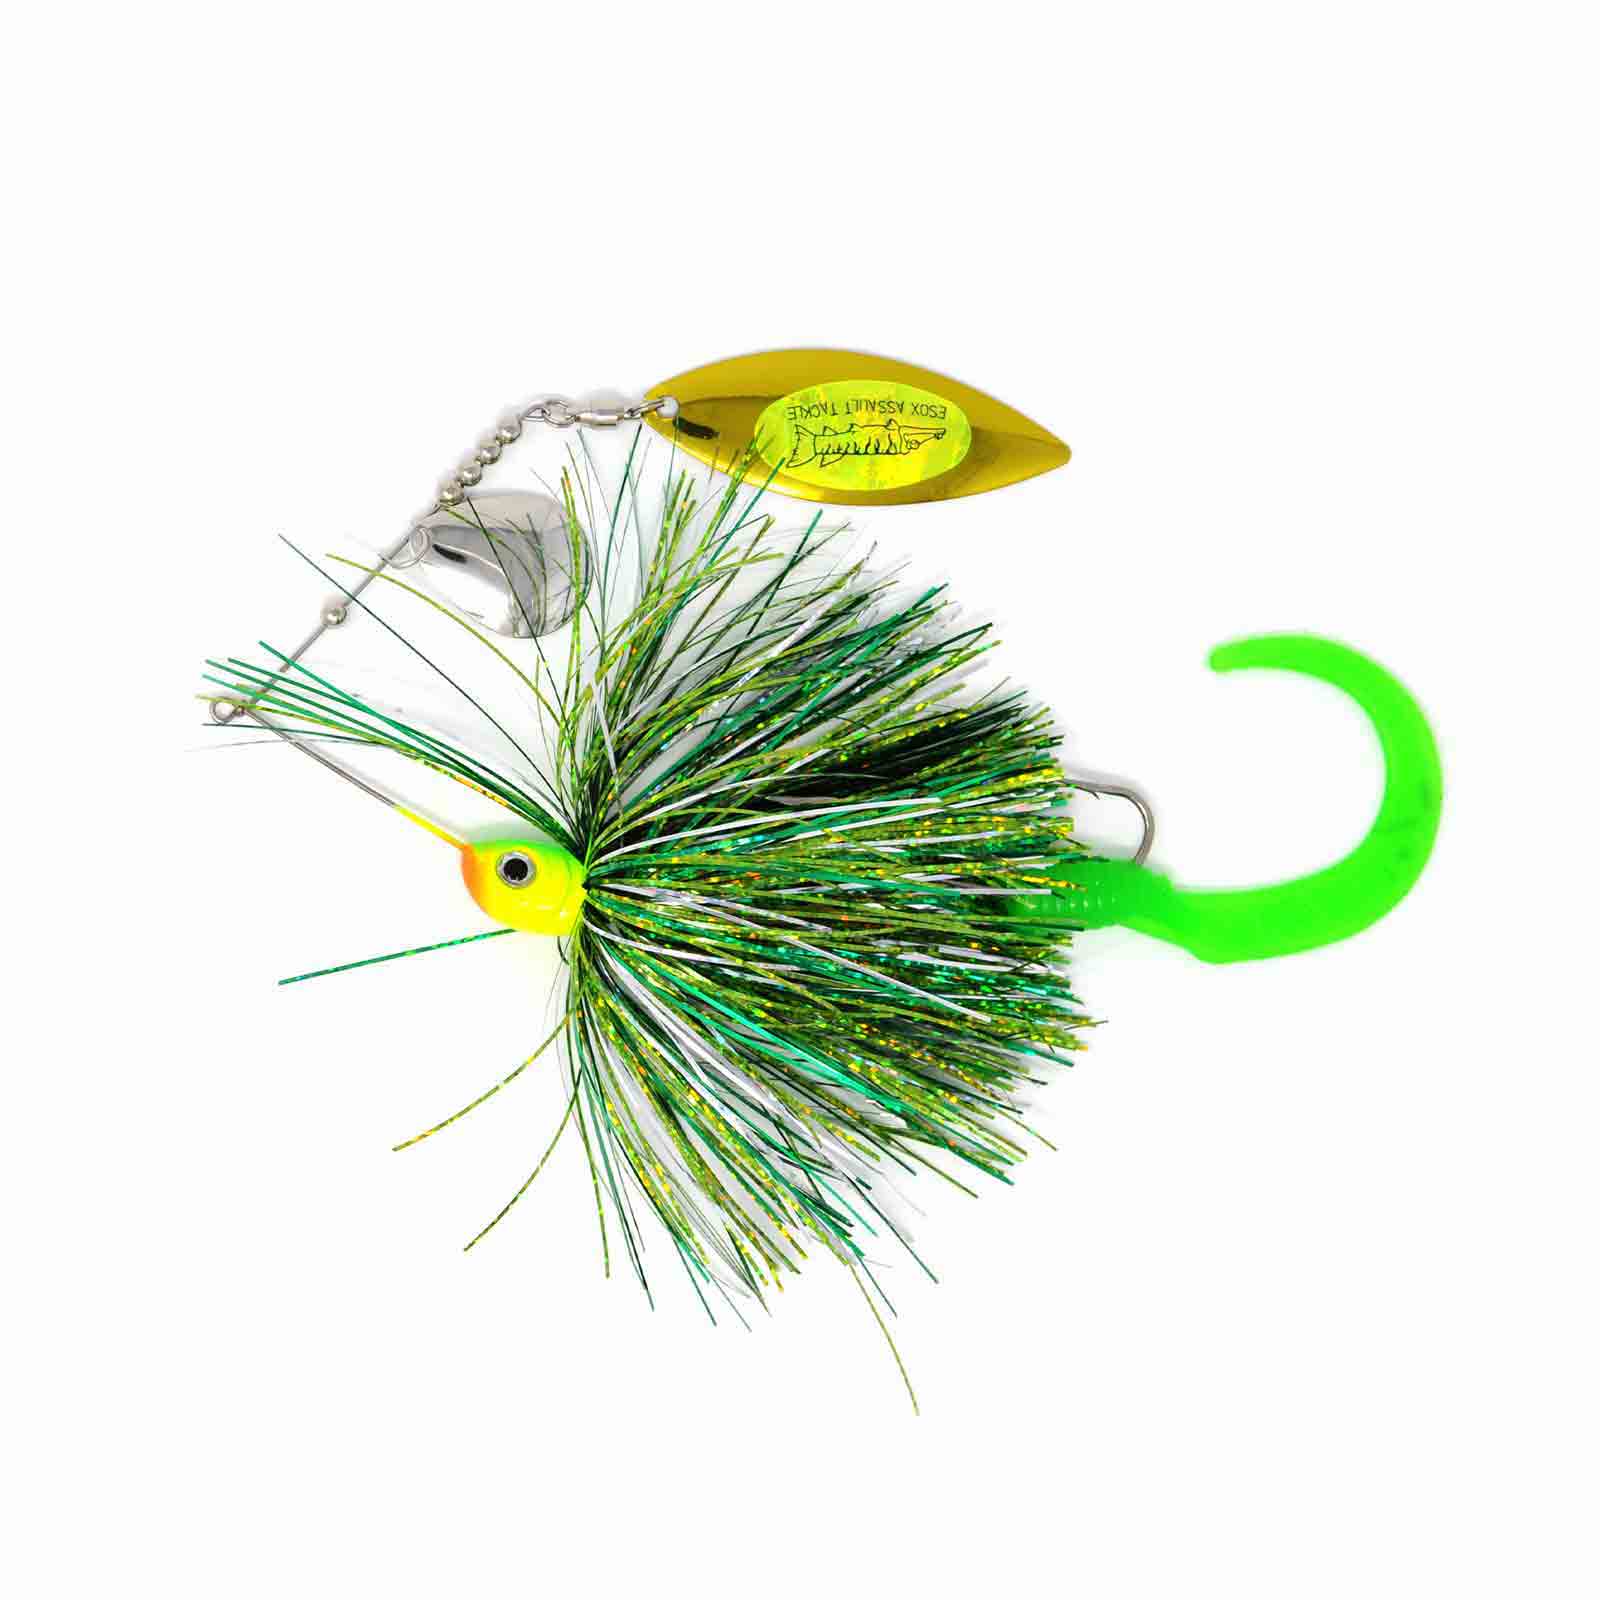 View of Spinnerbaits Esox Assault Spinnerbait Willow 1oz Gang Green available at EZOKO Pike and Musky Shop